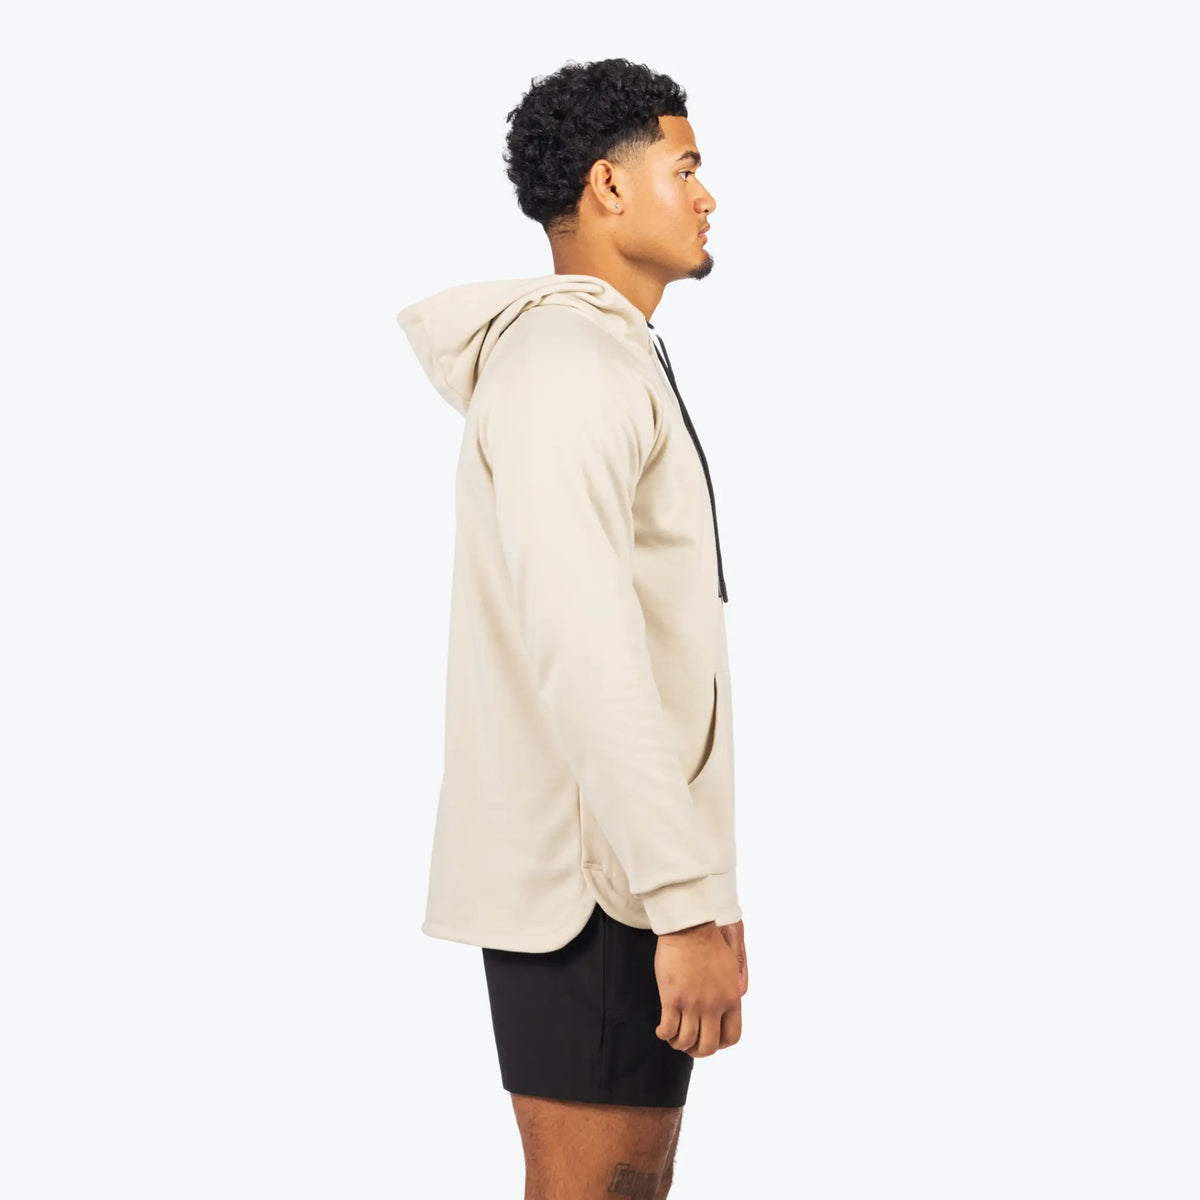 The uploaded image features a side view of a model wearing a professional baseball training hoodie with long sleeves. The hoodie is cream-colored, with a drawstring hood and the &quot;TATER&quot; logo printed along the sleeve, pairing well with the black athletic shorts the model is wearing. The attire highlights a combination of comfort, style, and functionality, suitable for both training and casual wear within a baseball lifestyle context.